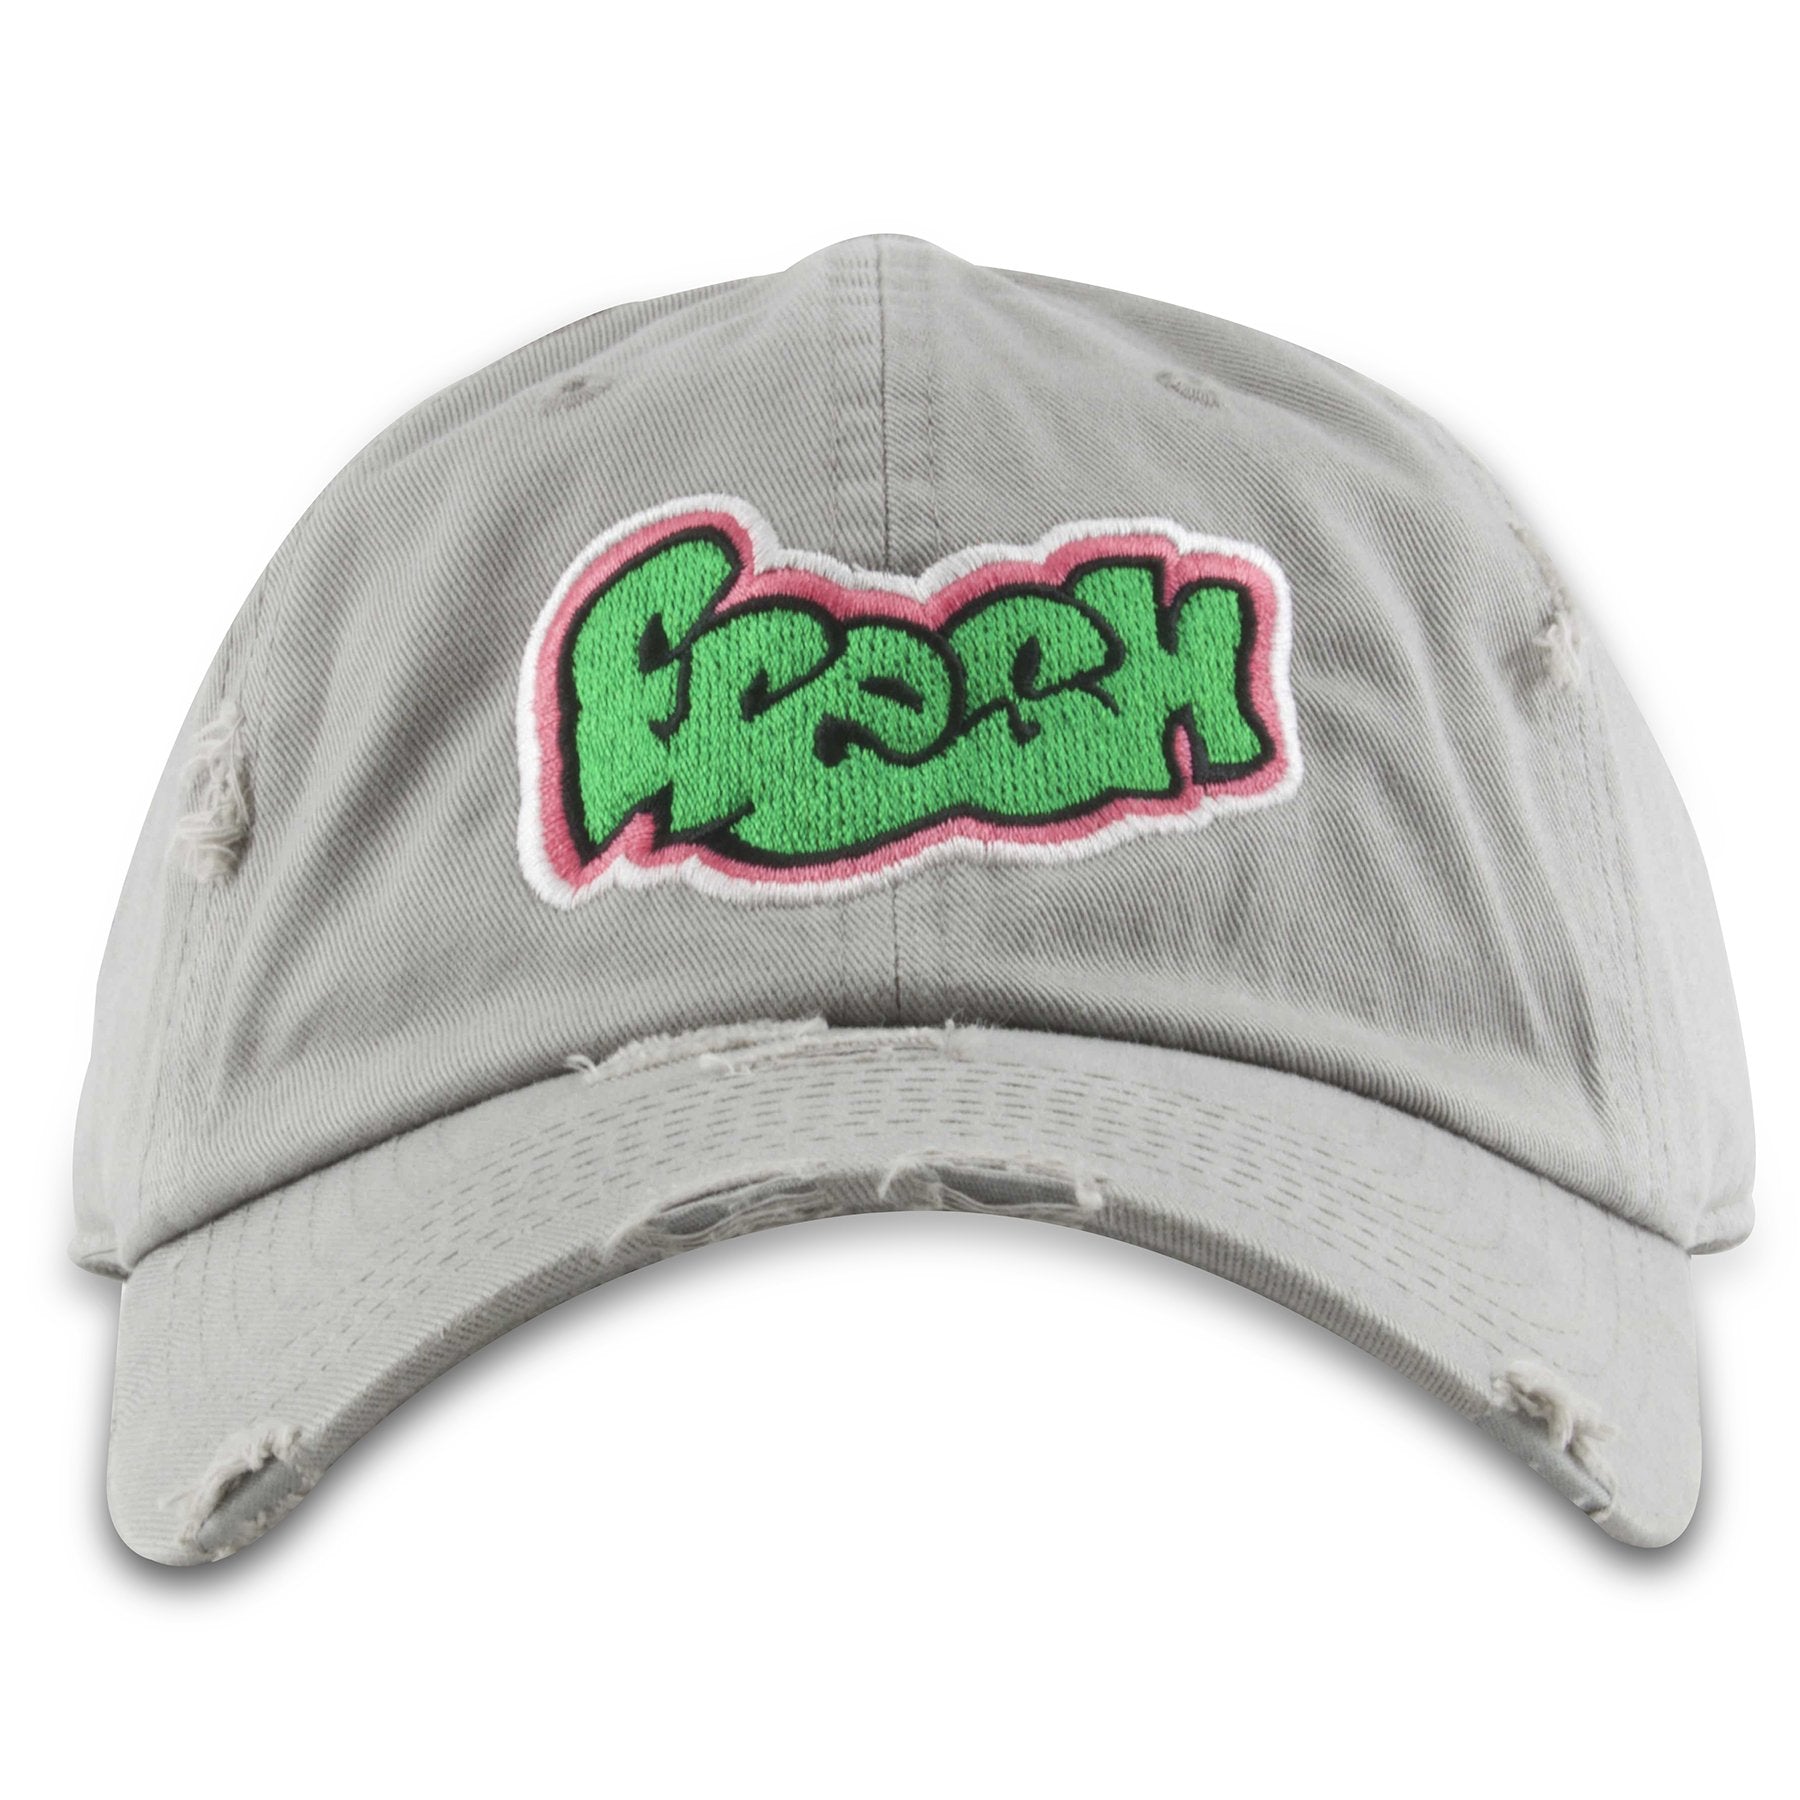 Embroidered on the front of the light gray distressed Fresh dad hat is the Fresh logo in green, black, hot pink, and white